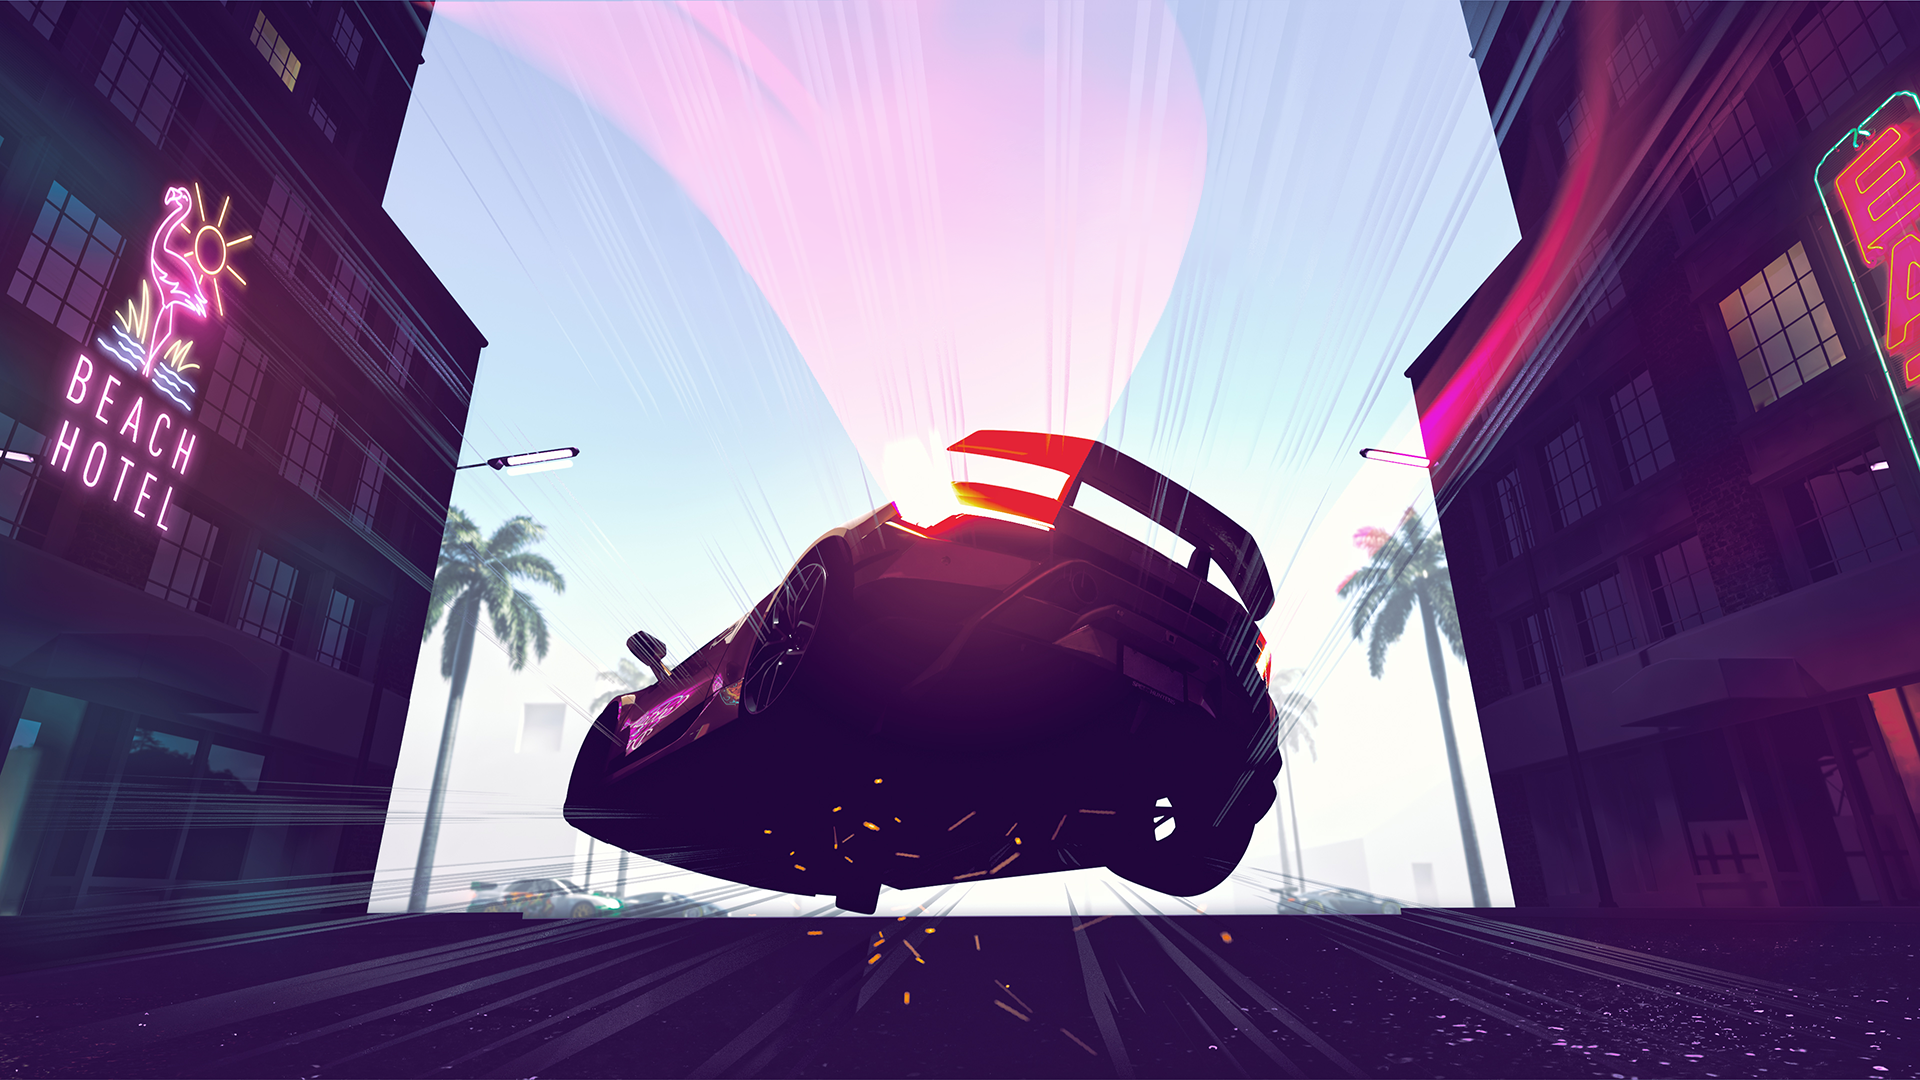 General 1920x1080 Need for Speed video games car digital art violet purple palm trees city